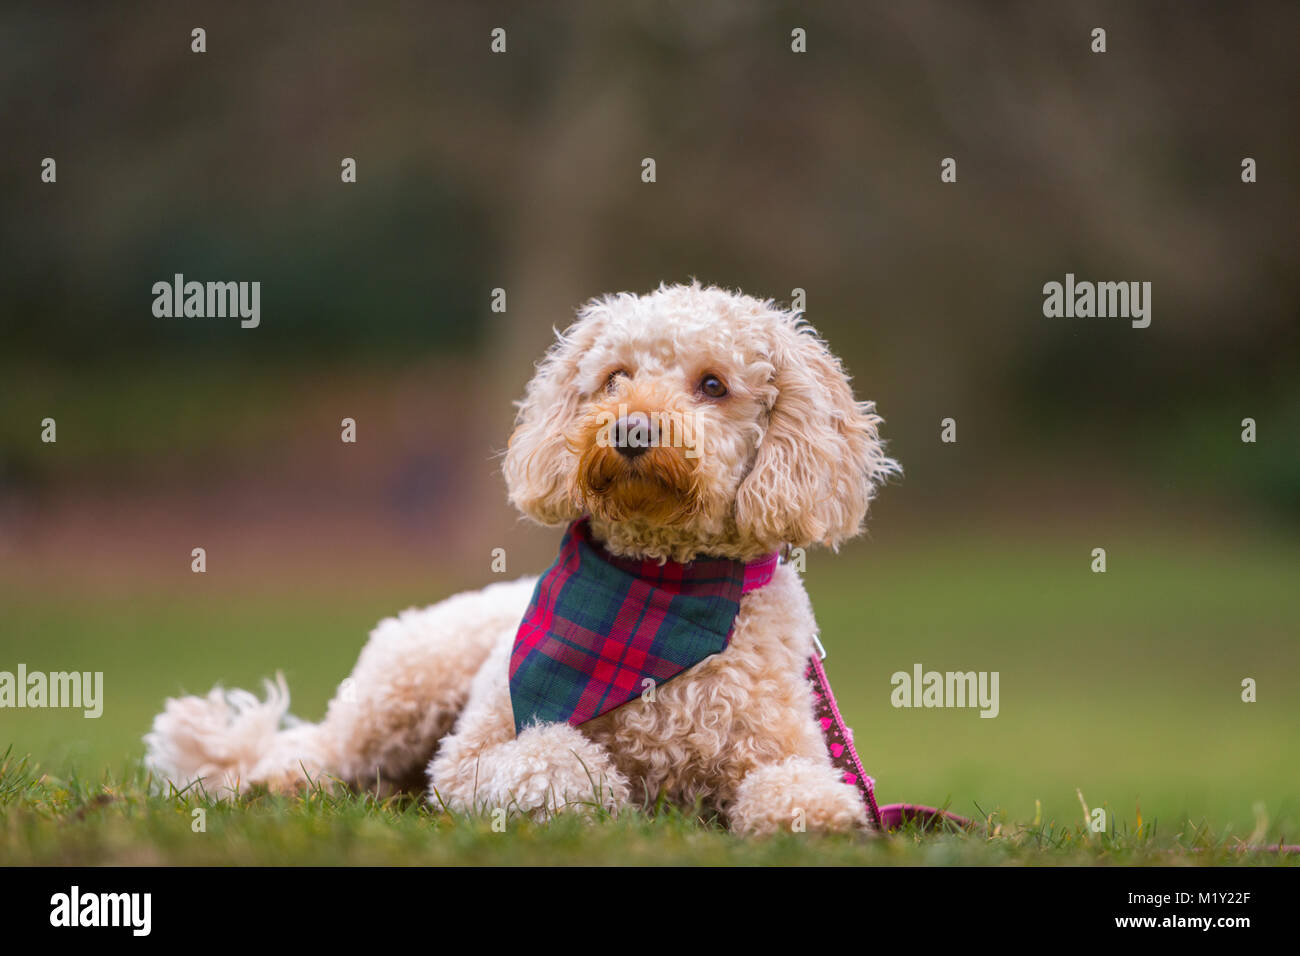 Little puppy terrier dog lying on the grass in a park Stock Photo